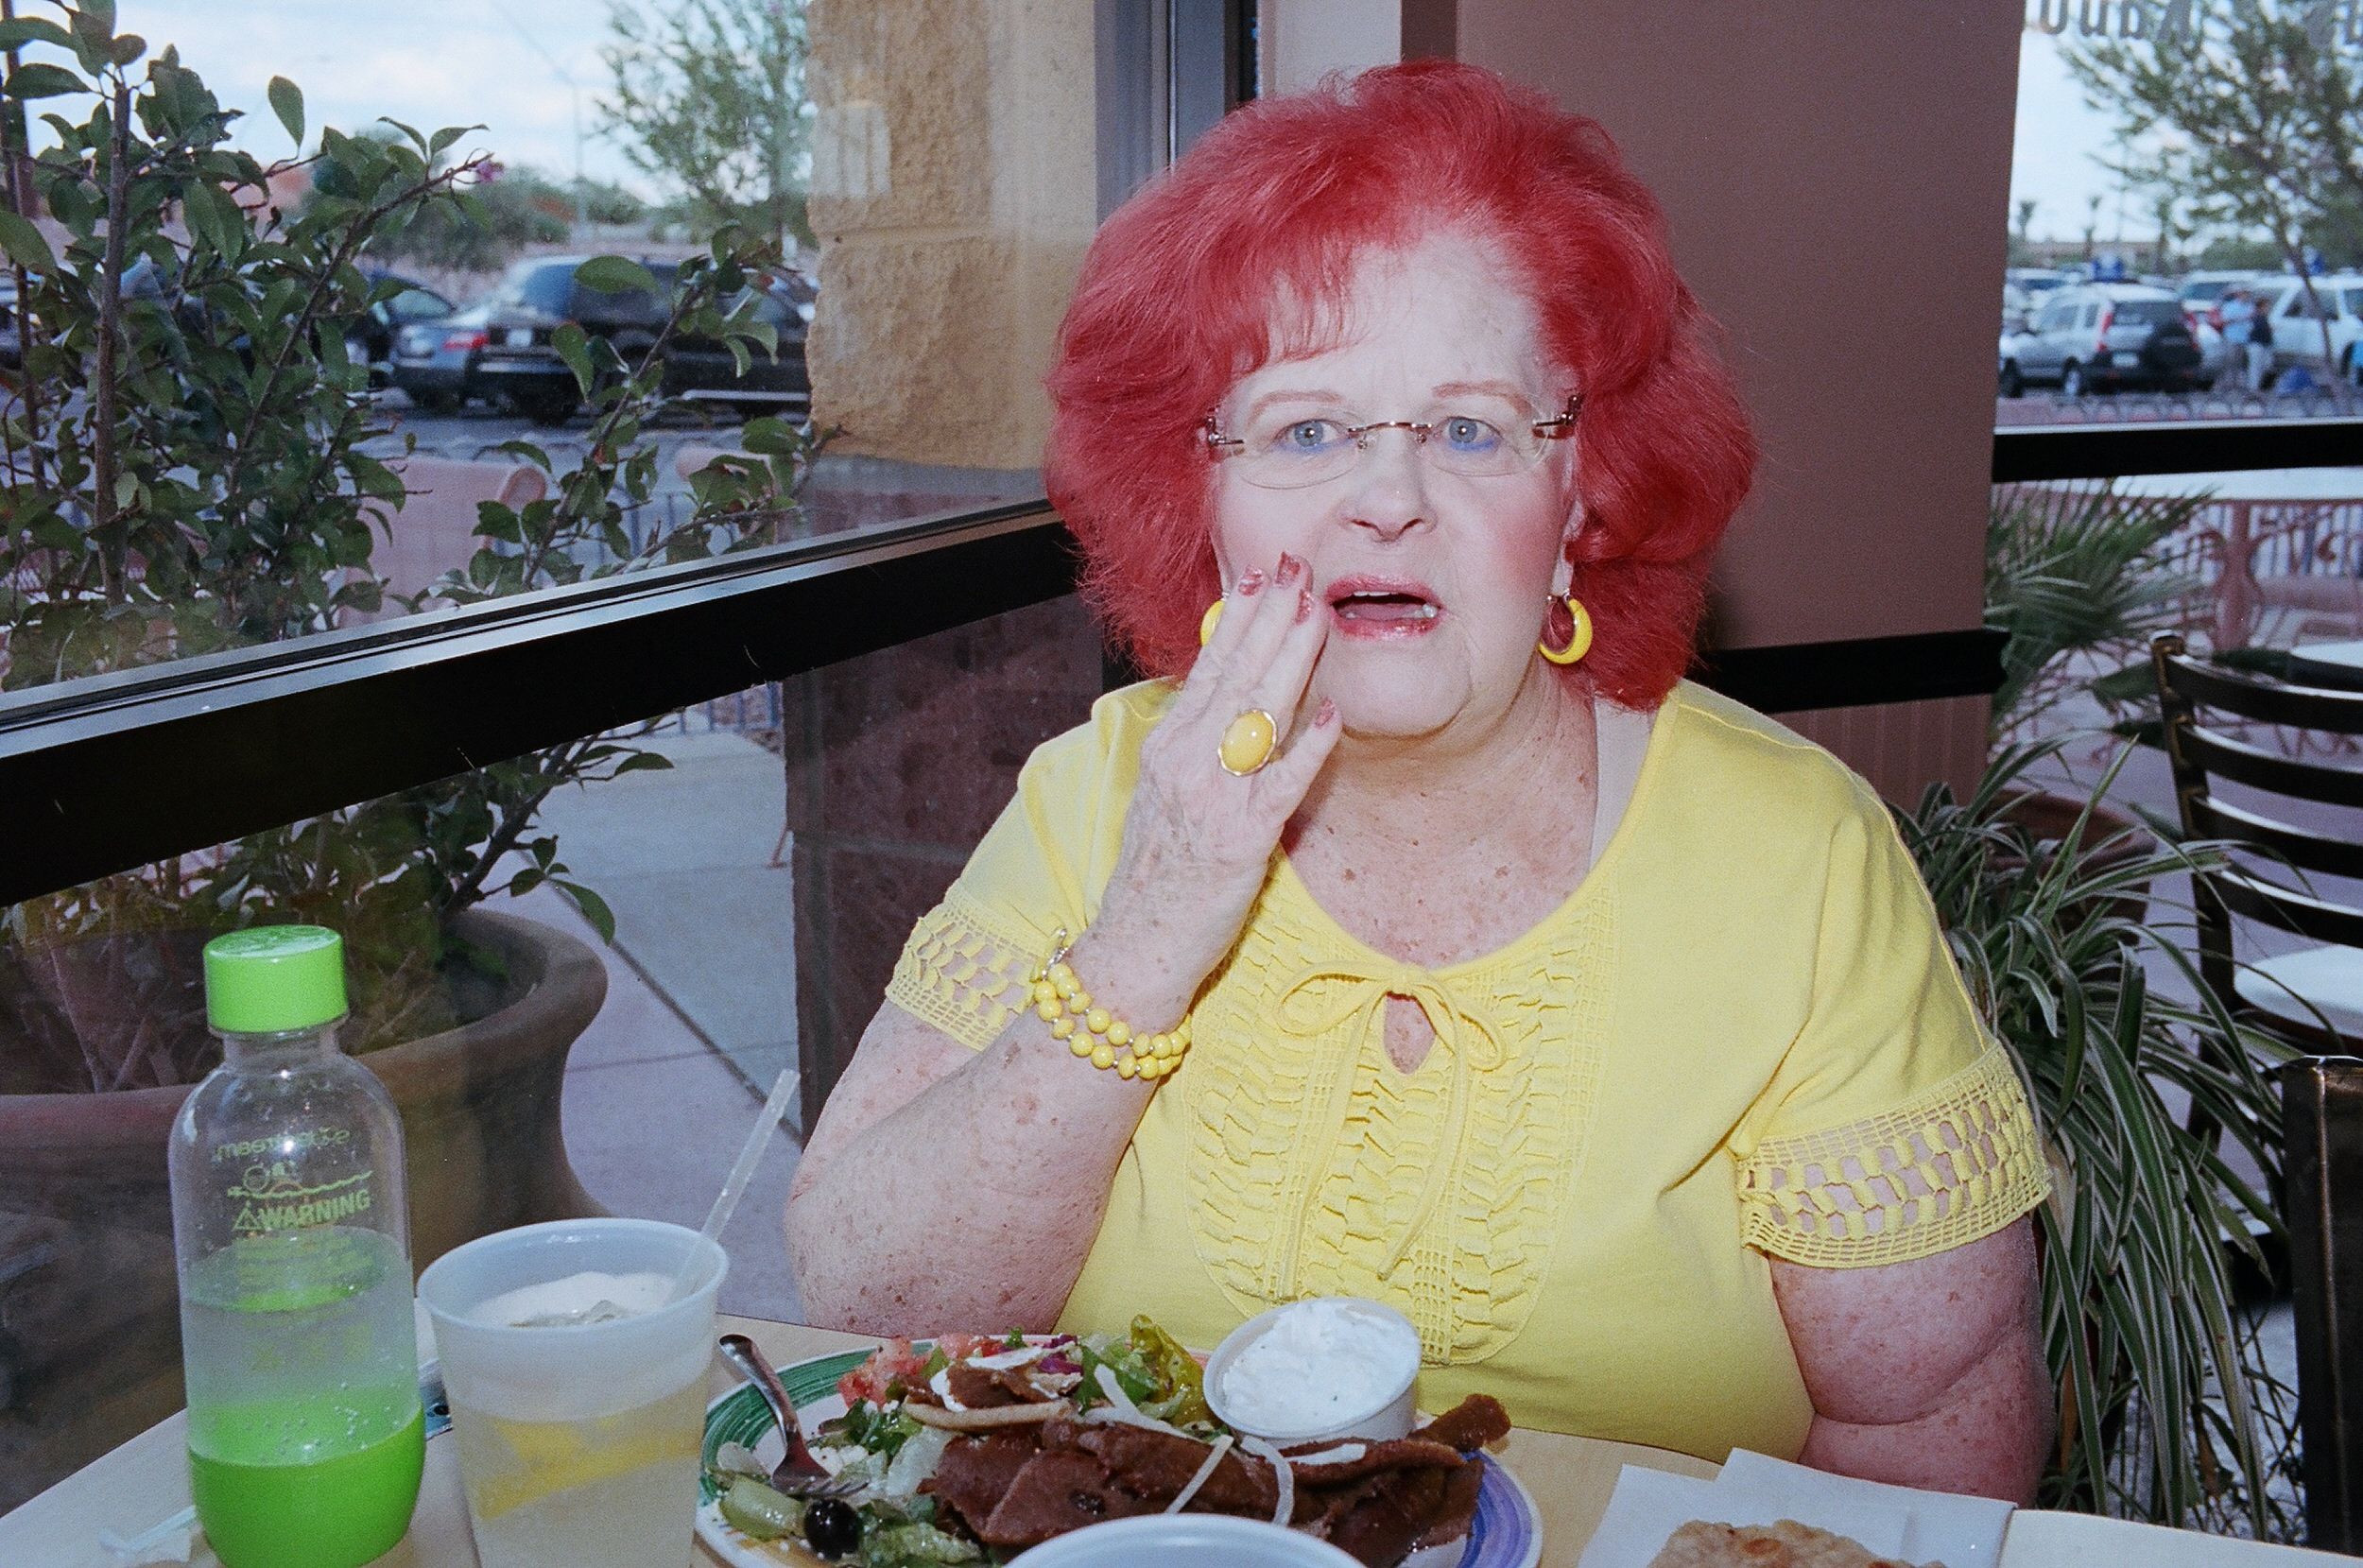 eric kim street photography only in america2 red hair